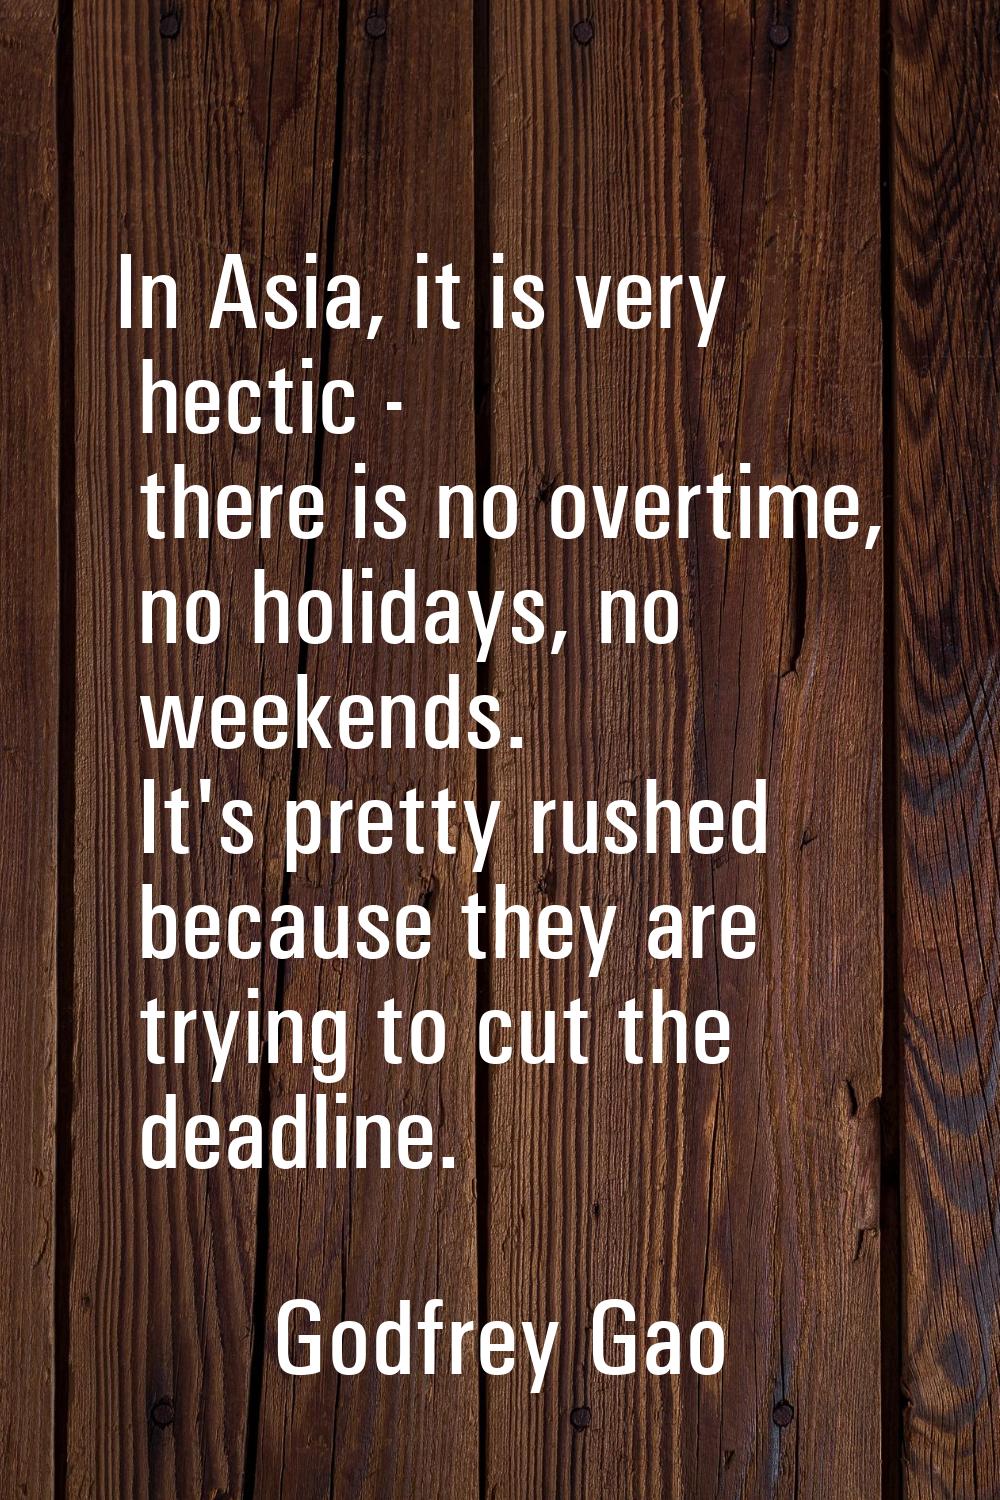 In Asia, it is very hectic - there is no overtime, no holidays, no weekends. It's pretty rushed bec